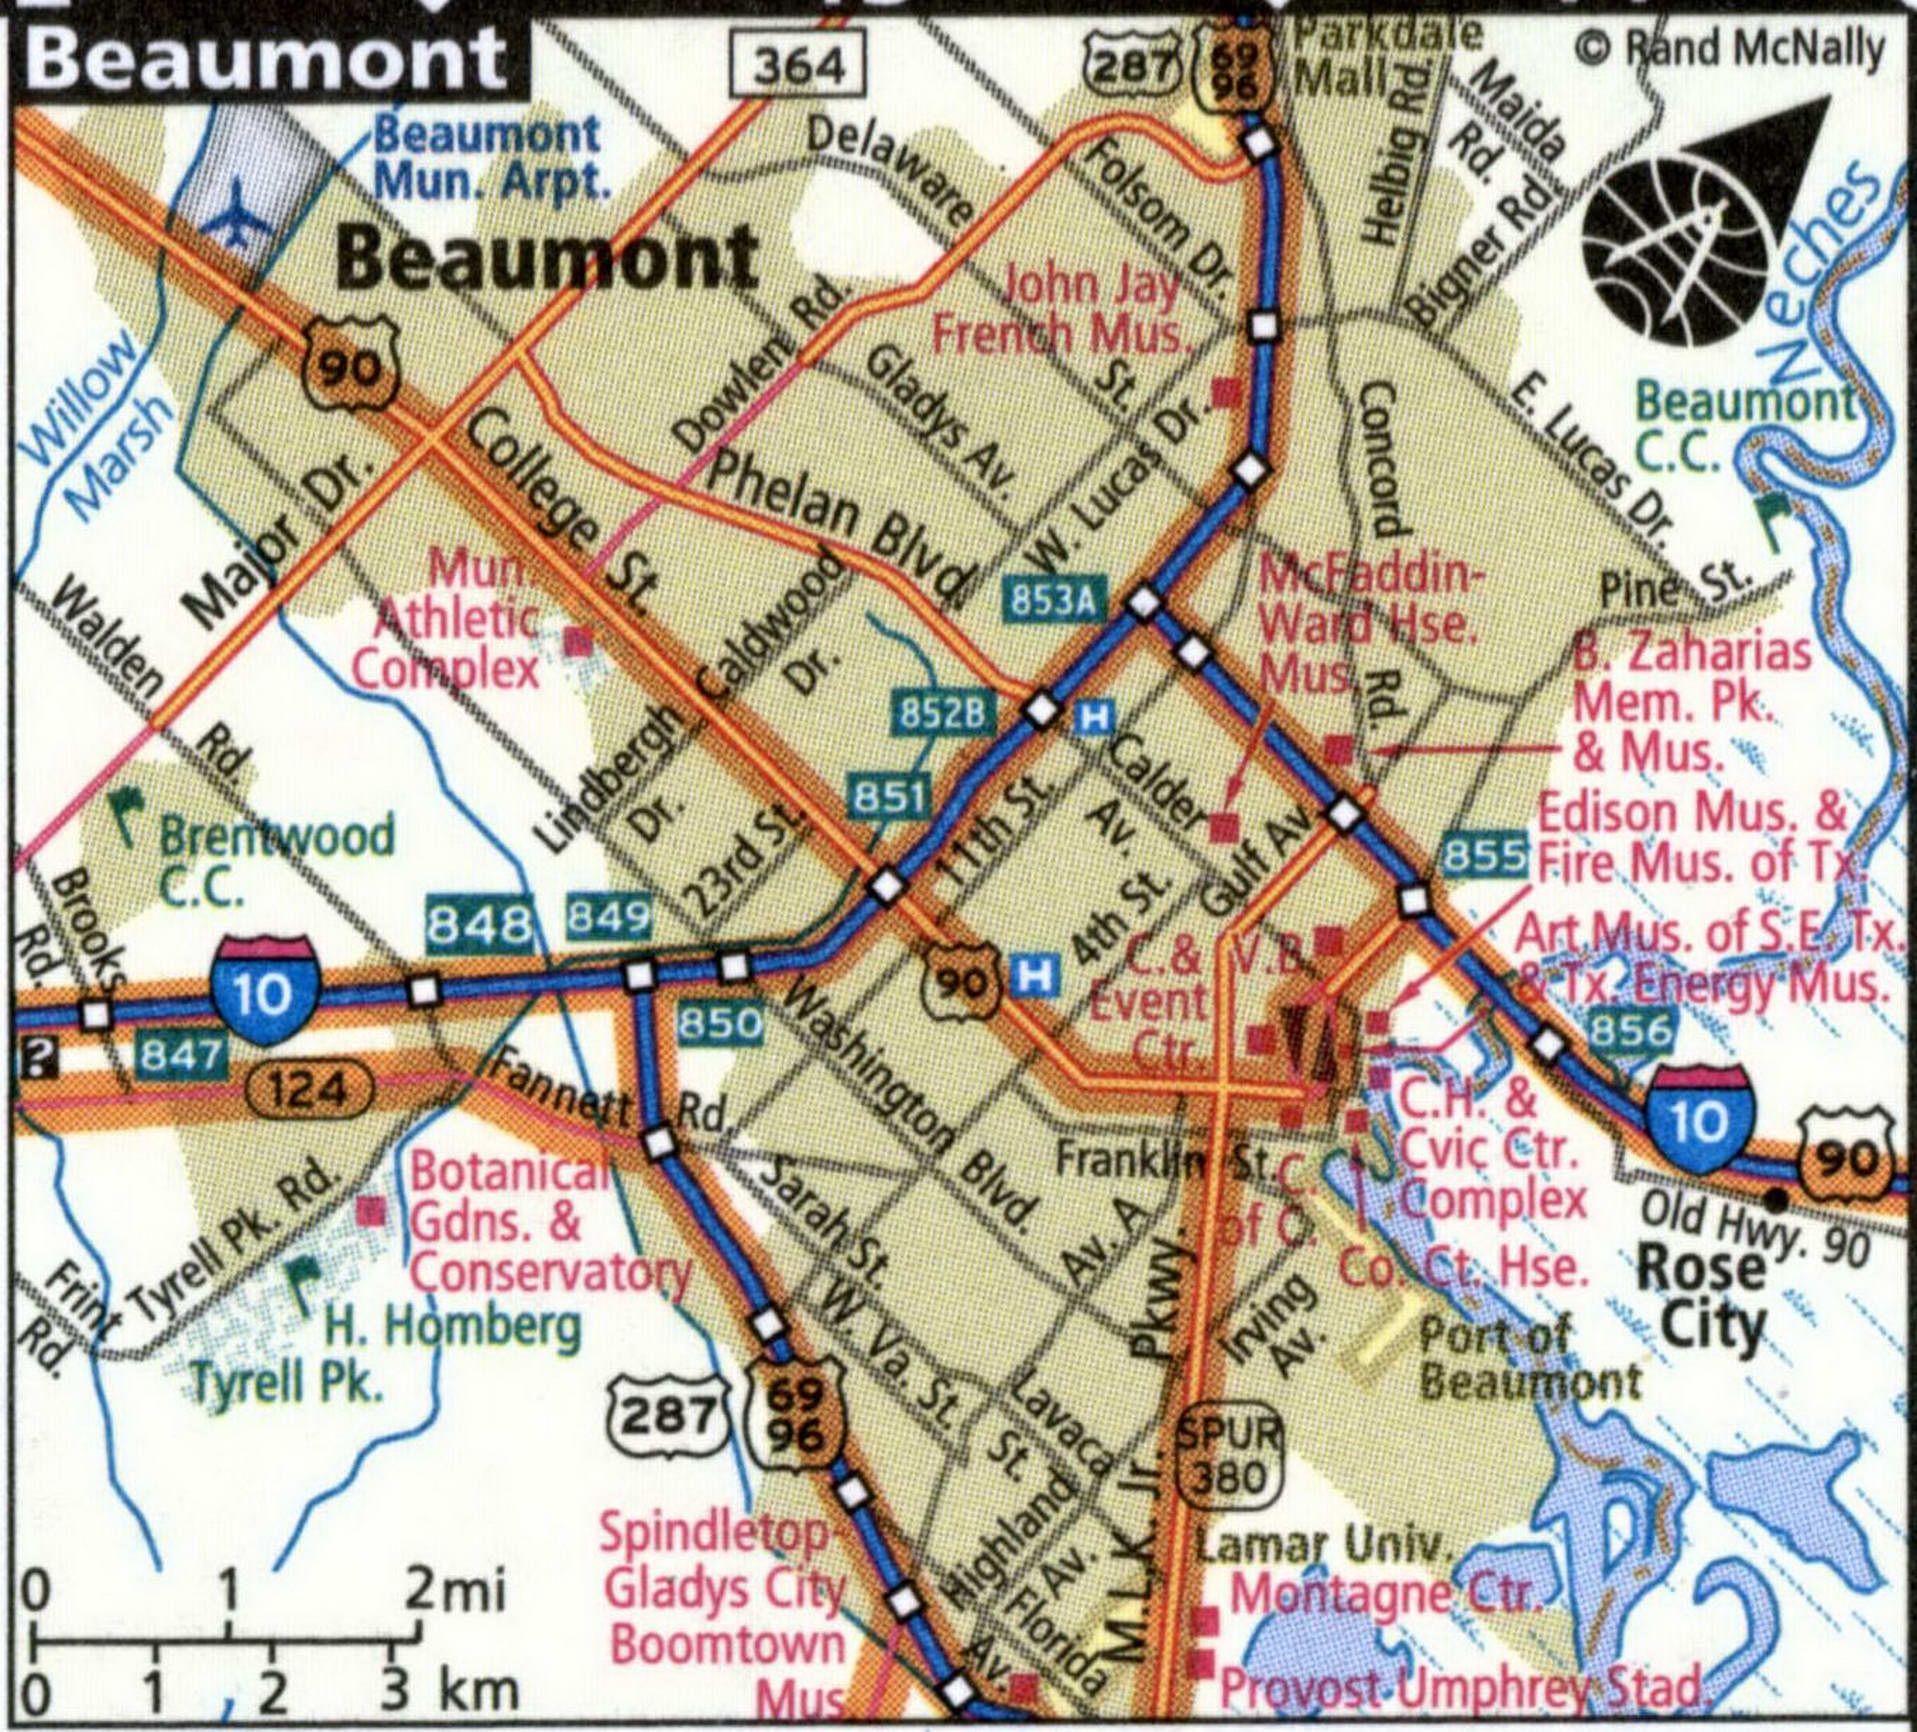 Beamont city map for truckers